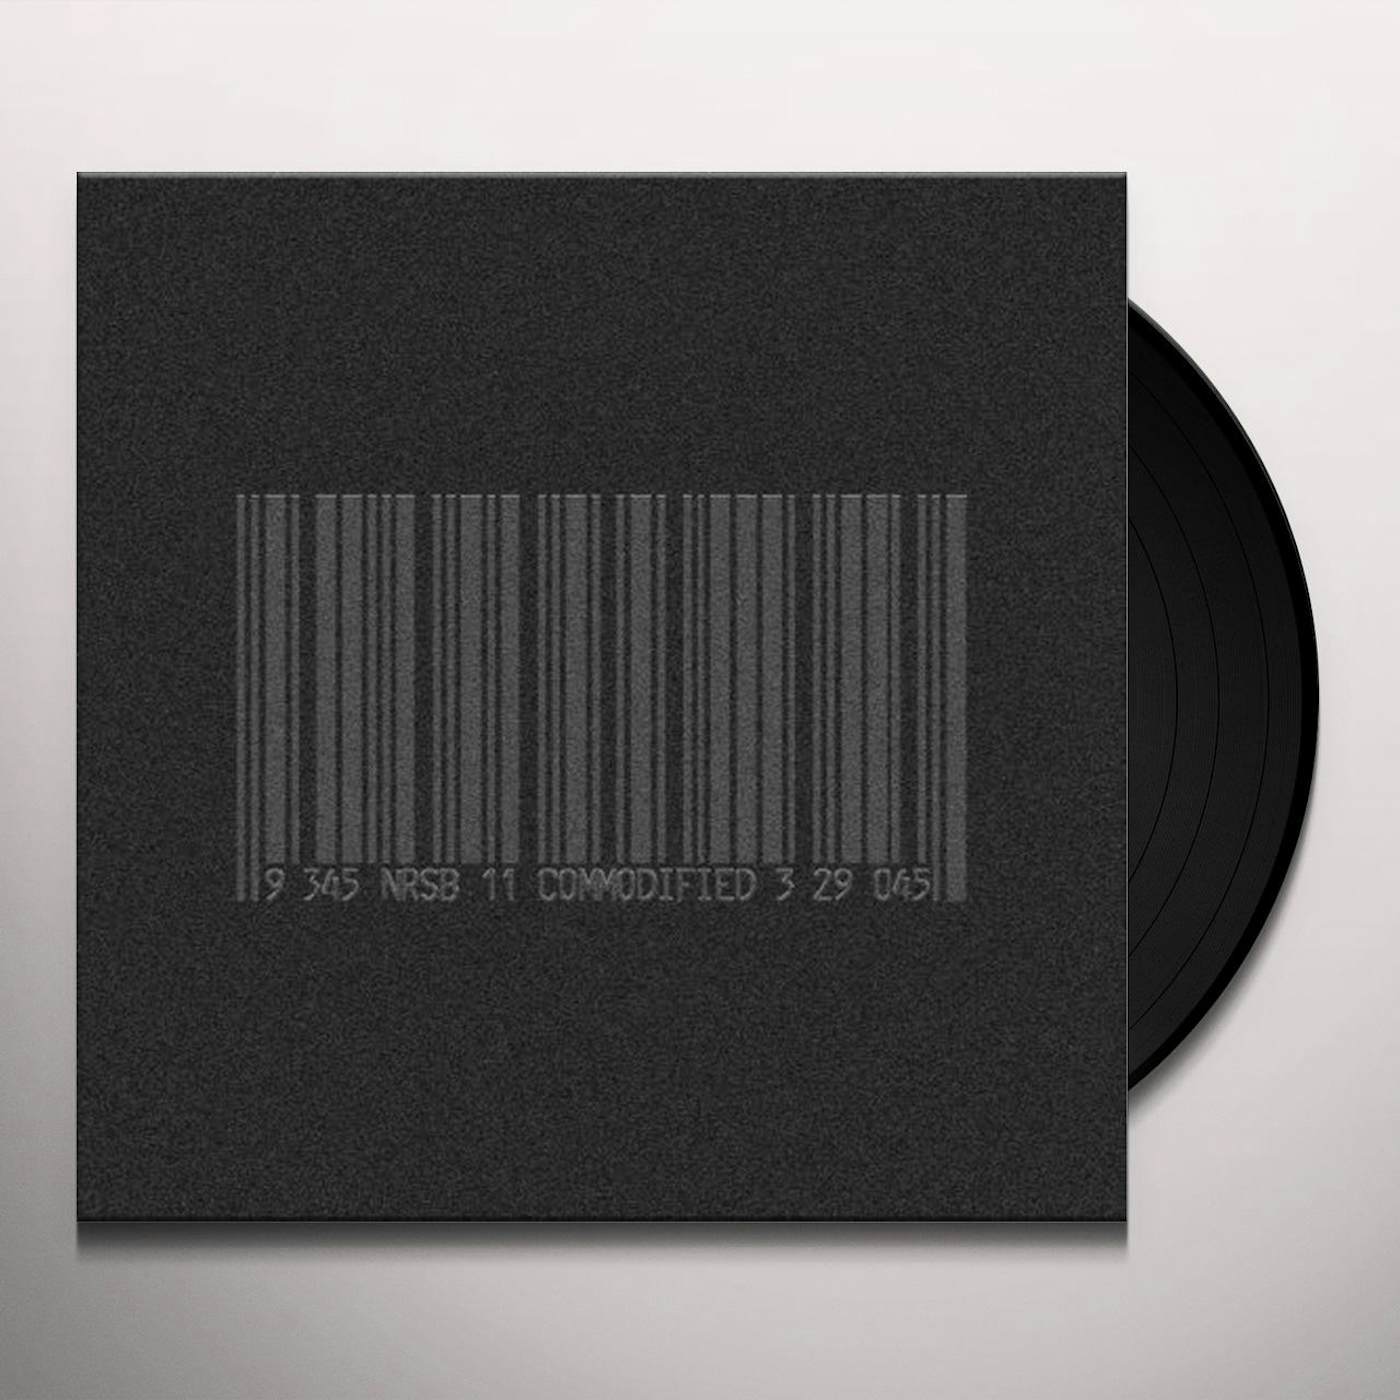 Nrsb-11 COMMODIFIED Vinyl Record - UK Release